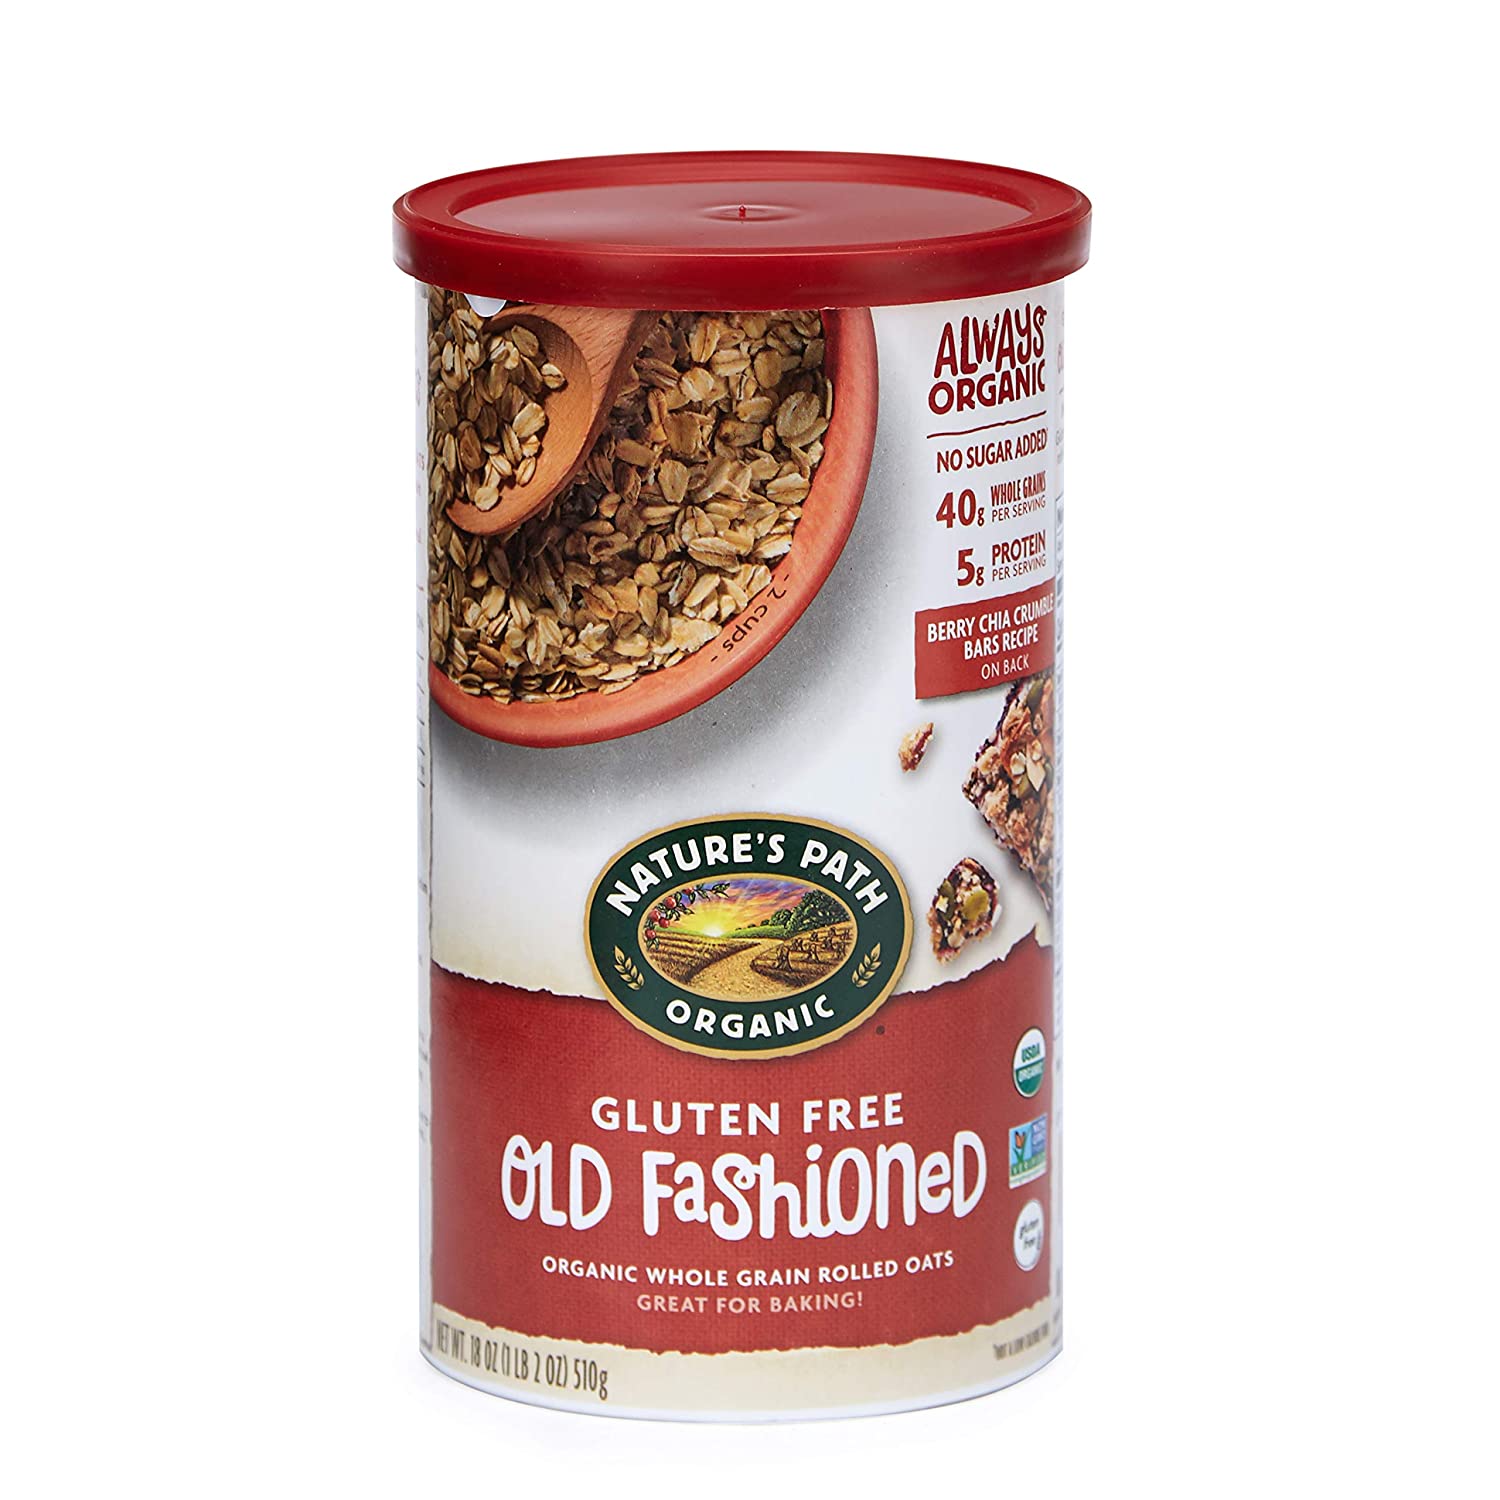 Nature's Path Gluten Free Old Fashioned Rolled Oats